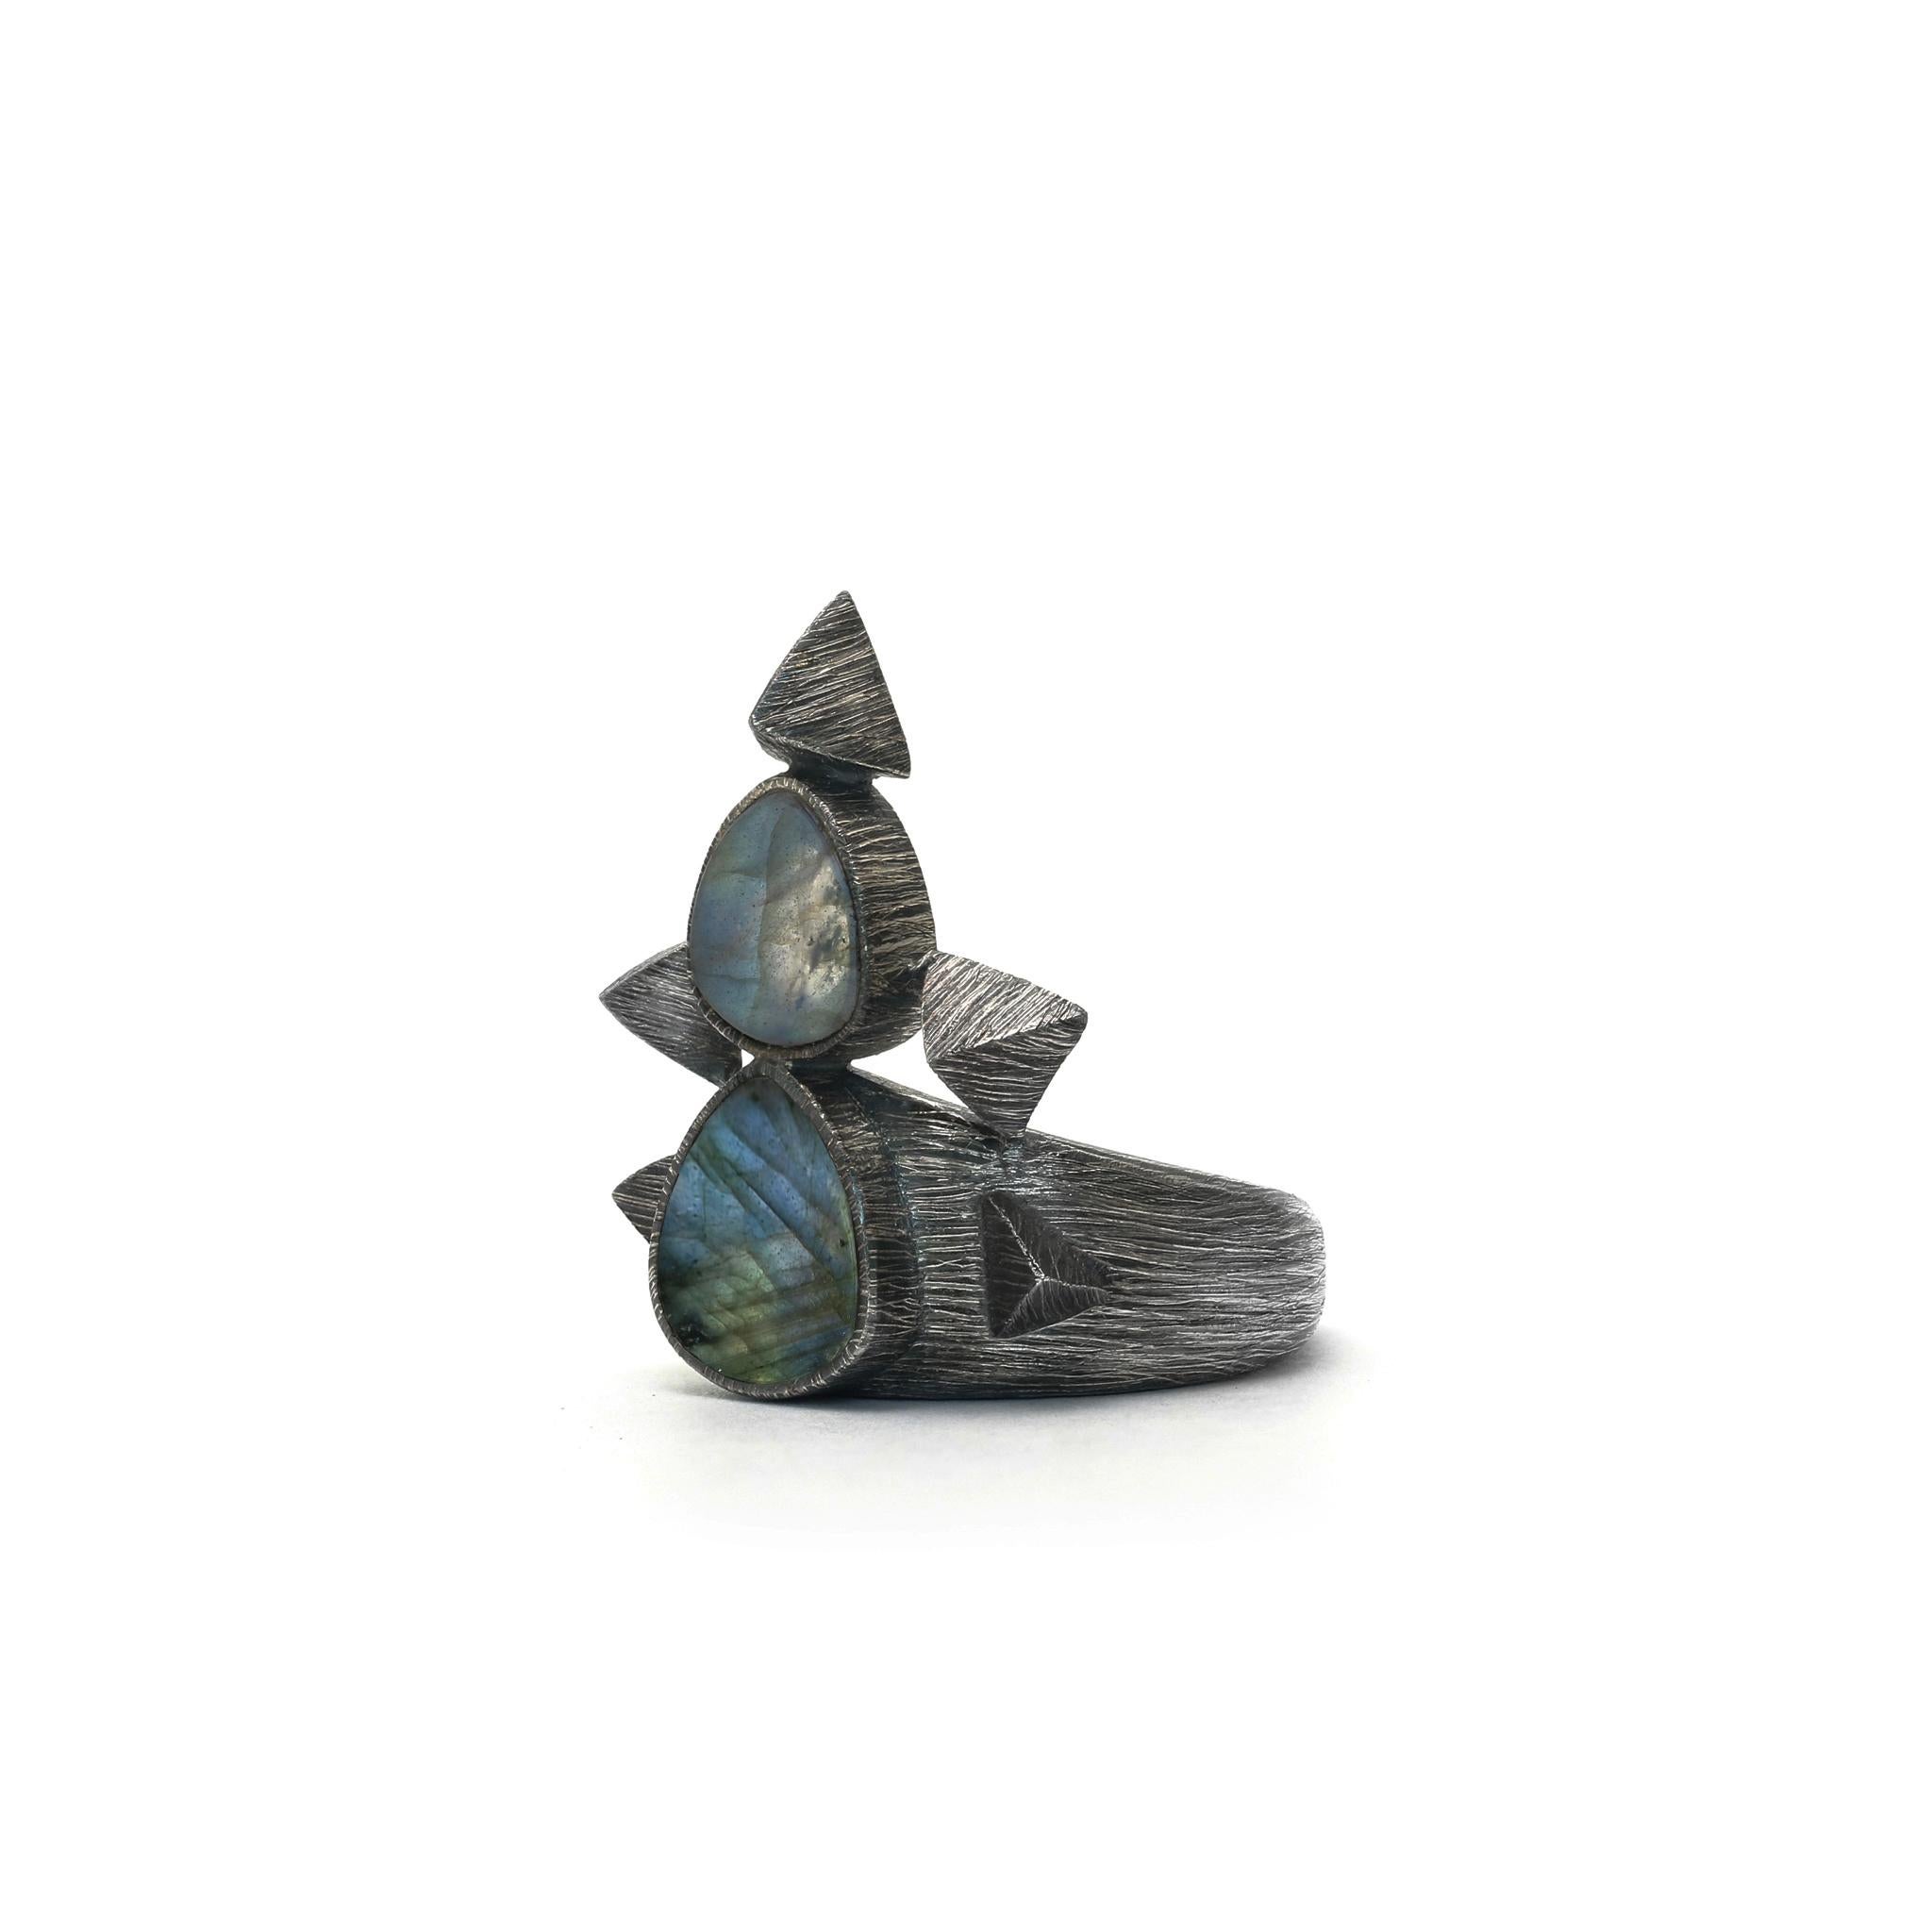 Within this valley of pyramids is ensconced an oasis of blue.
925 Sterling Silver Etched & Oxidized
Set with 1x1cm and 1,2x1,2cm Labradorite
size: 0,78